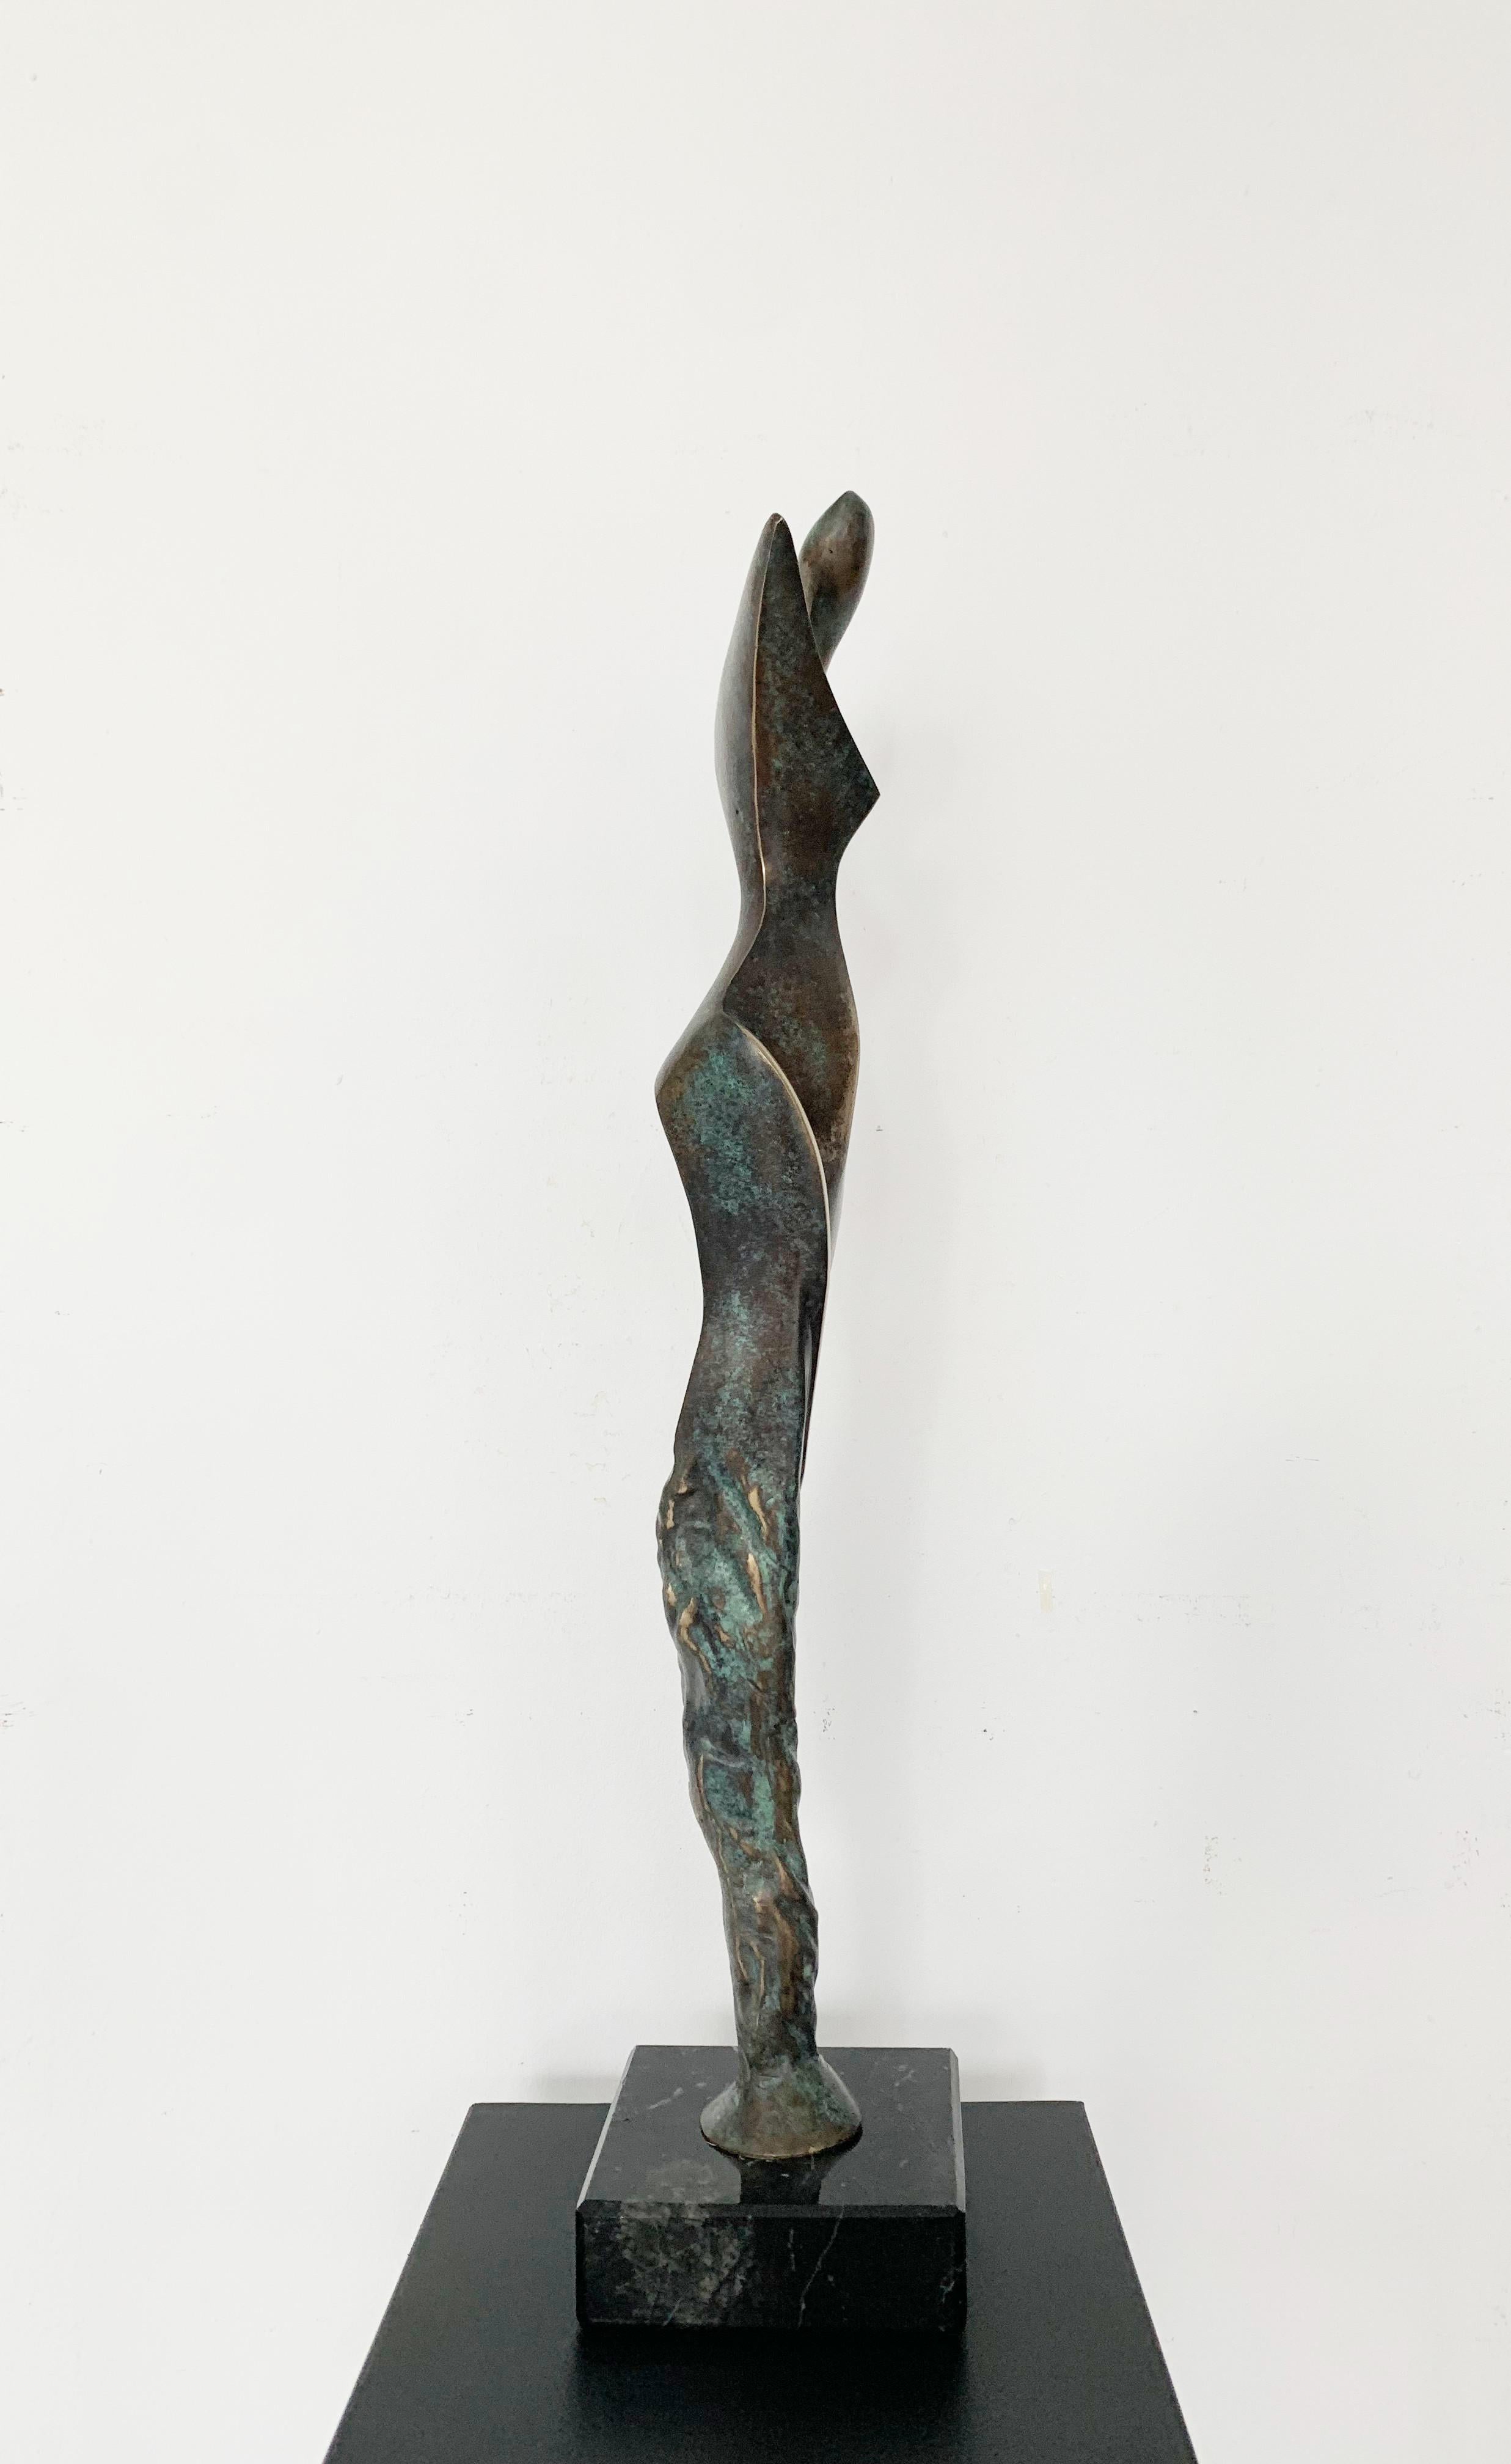 Contemporary bronze sculpture on marble base by Polish artist Stan Wysocki. Artwork comes from limited edition of 8. Sculpture depicts female figure filtered through geometric, synthesizing style. Artist uses patina very consciously as an artistic